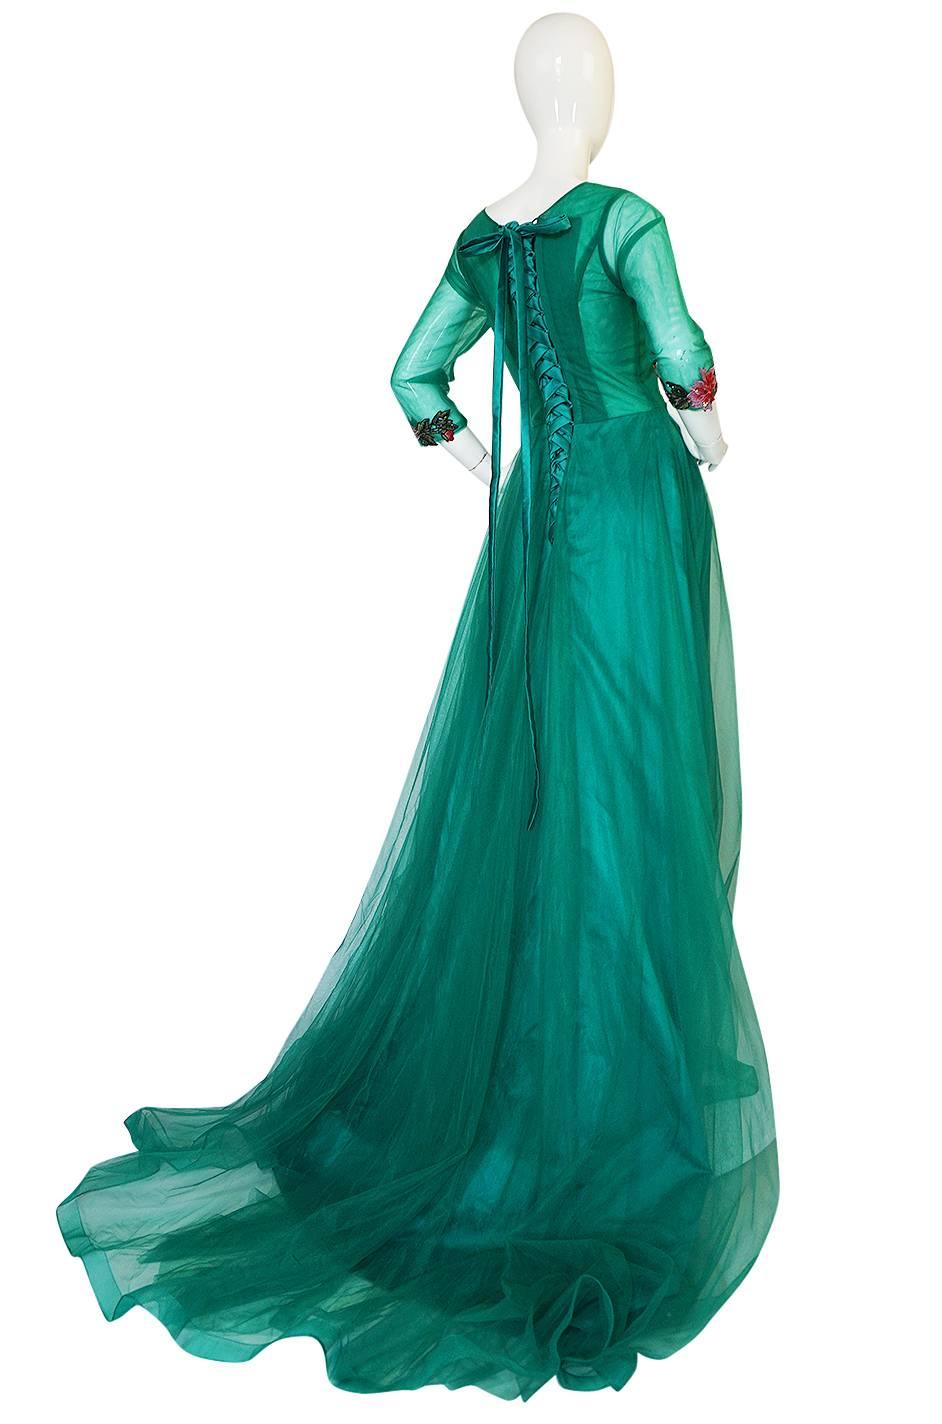 This is most likely a more modern piece but has a lovely vintage feel to it. The combination of colors used on it and its sweeping lines and train make it appropriate for the grandest of events. The body of the dress is made of a emerald green net